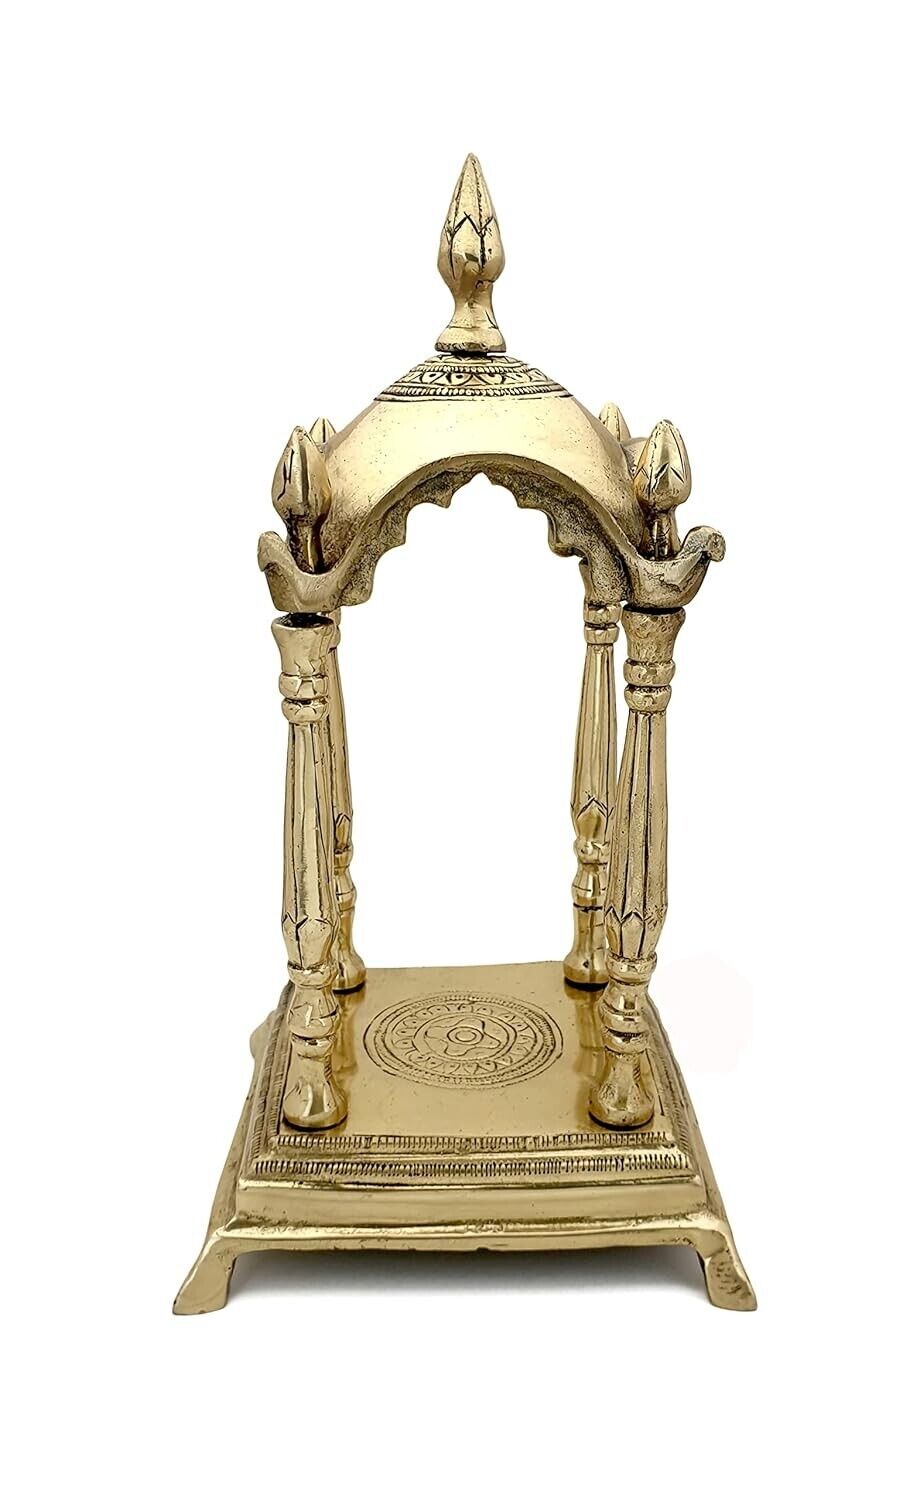 Handcrafted Antique Brass Hindu Temple For Worship Mandir For Pooja Home Decor